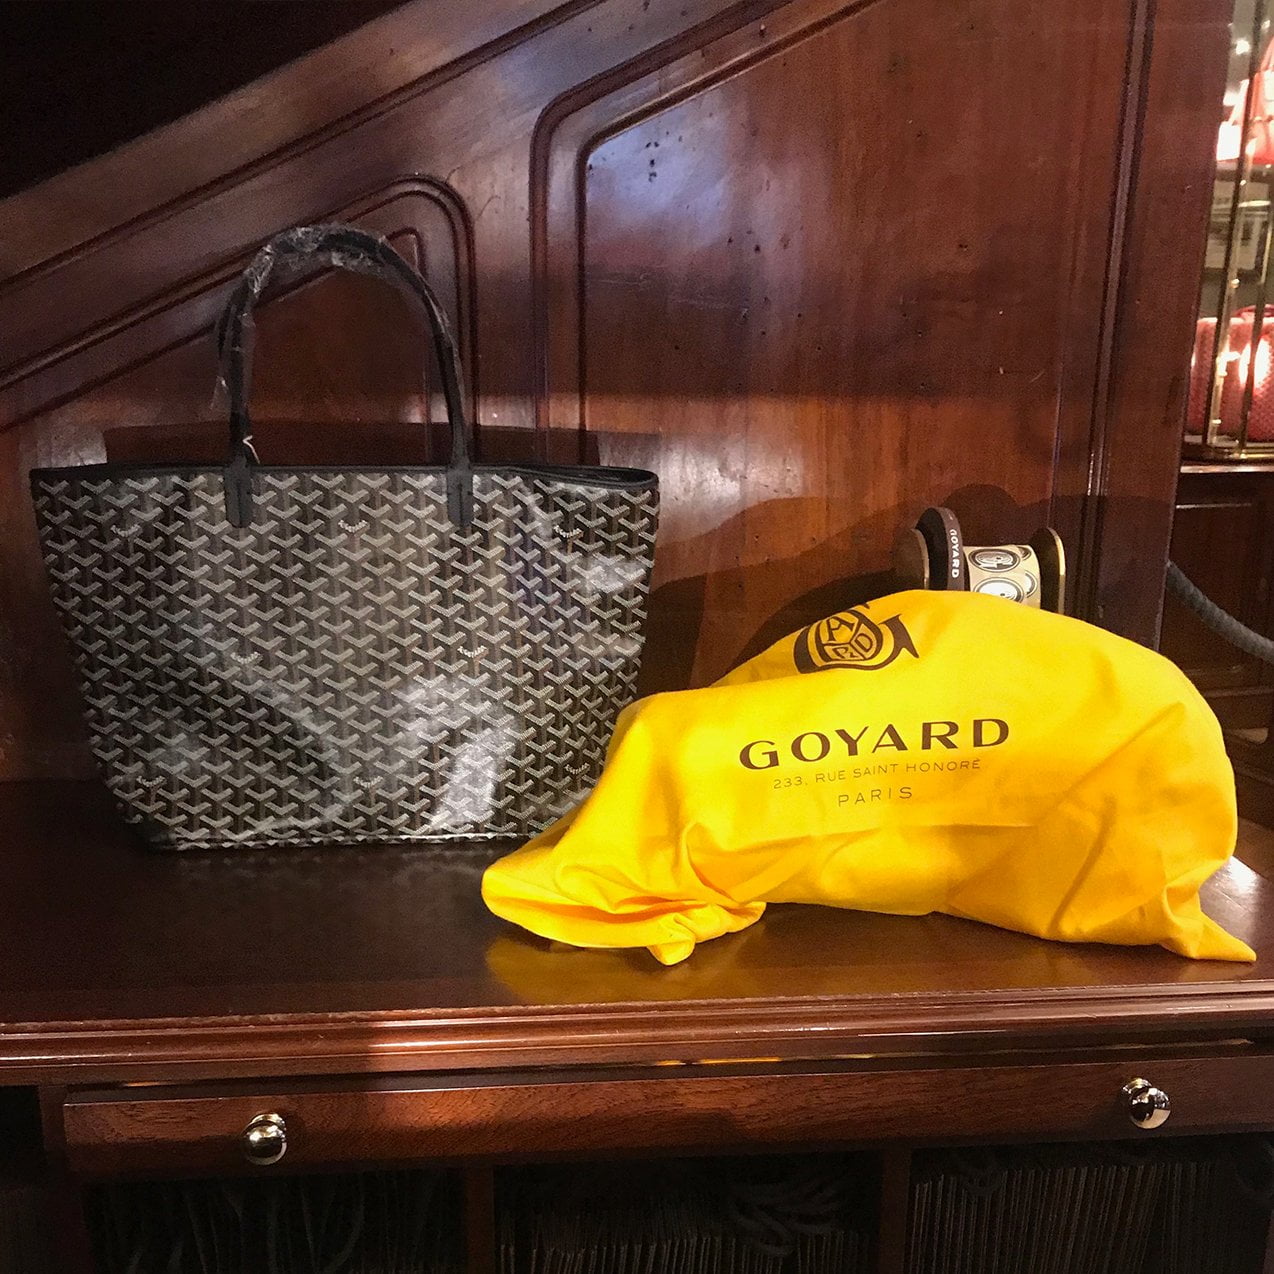 Where's Best to Buy Goyard Handbags? Are Paris Stores Cheapest?